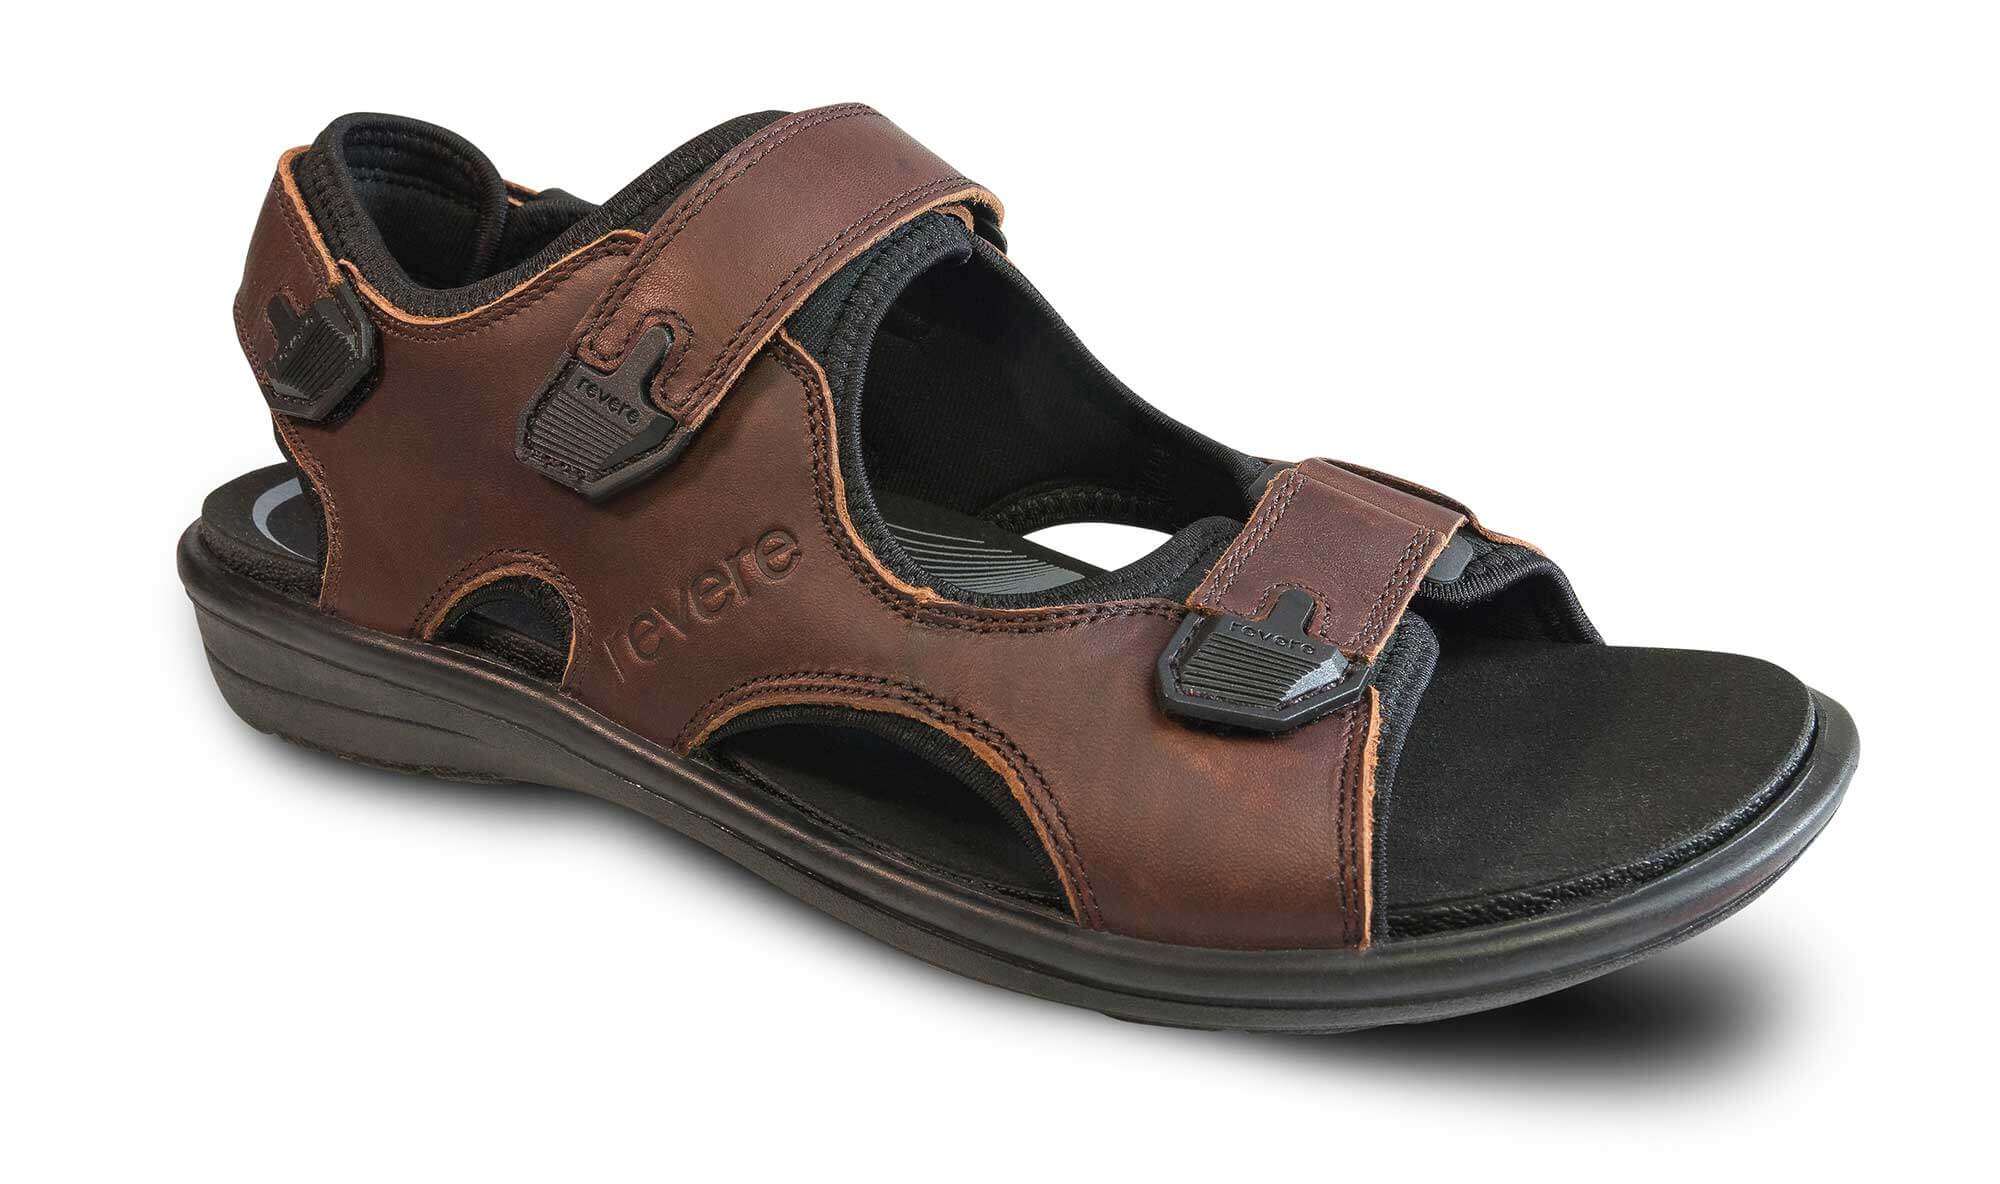 Revere Montana II - Men's Sandal - Medium - Extra Depth With Removable Foot Beds